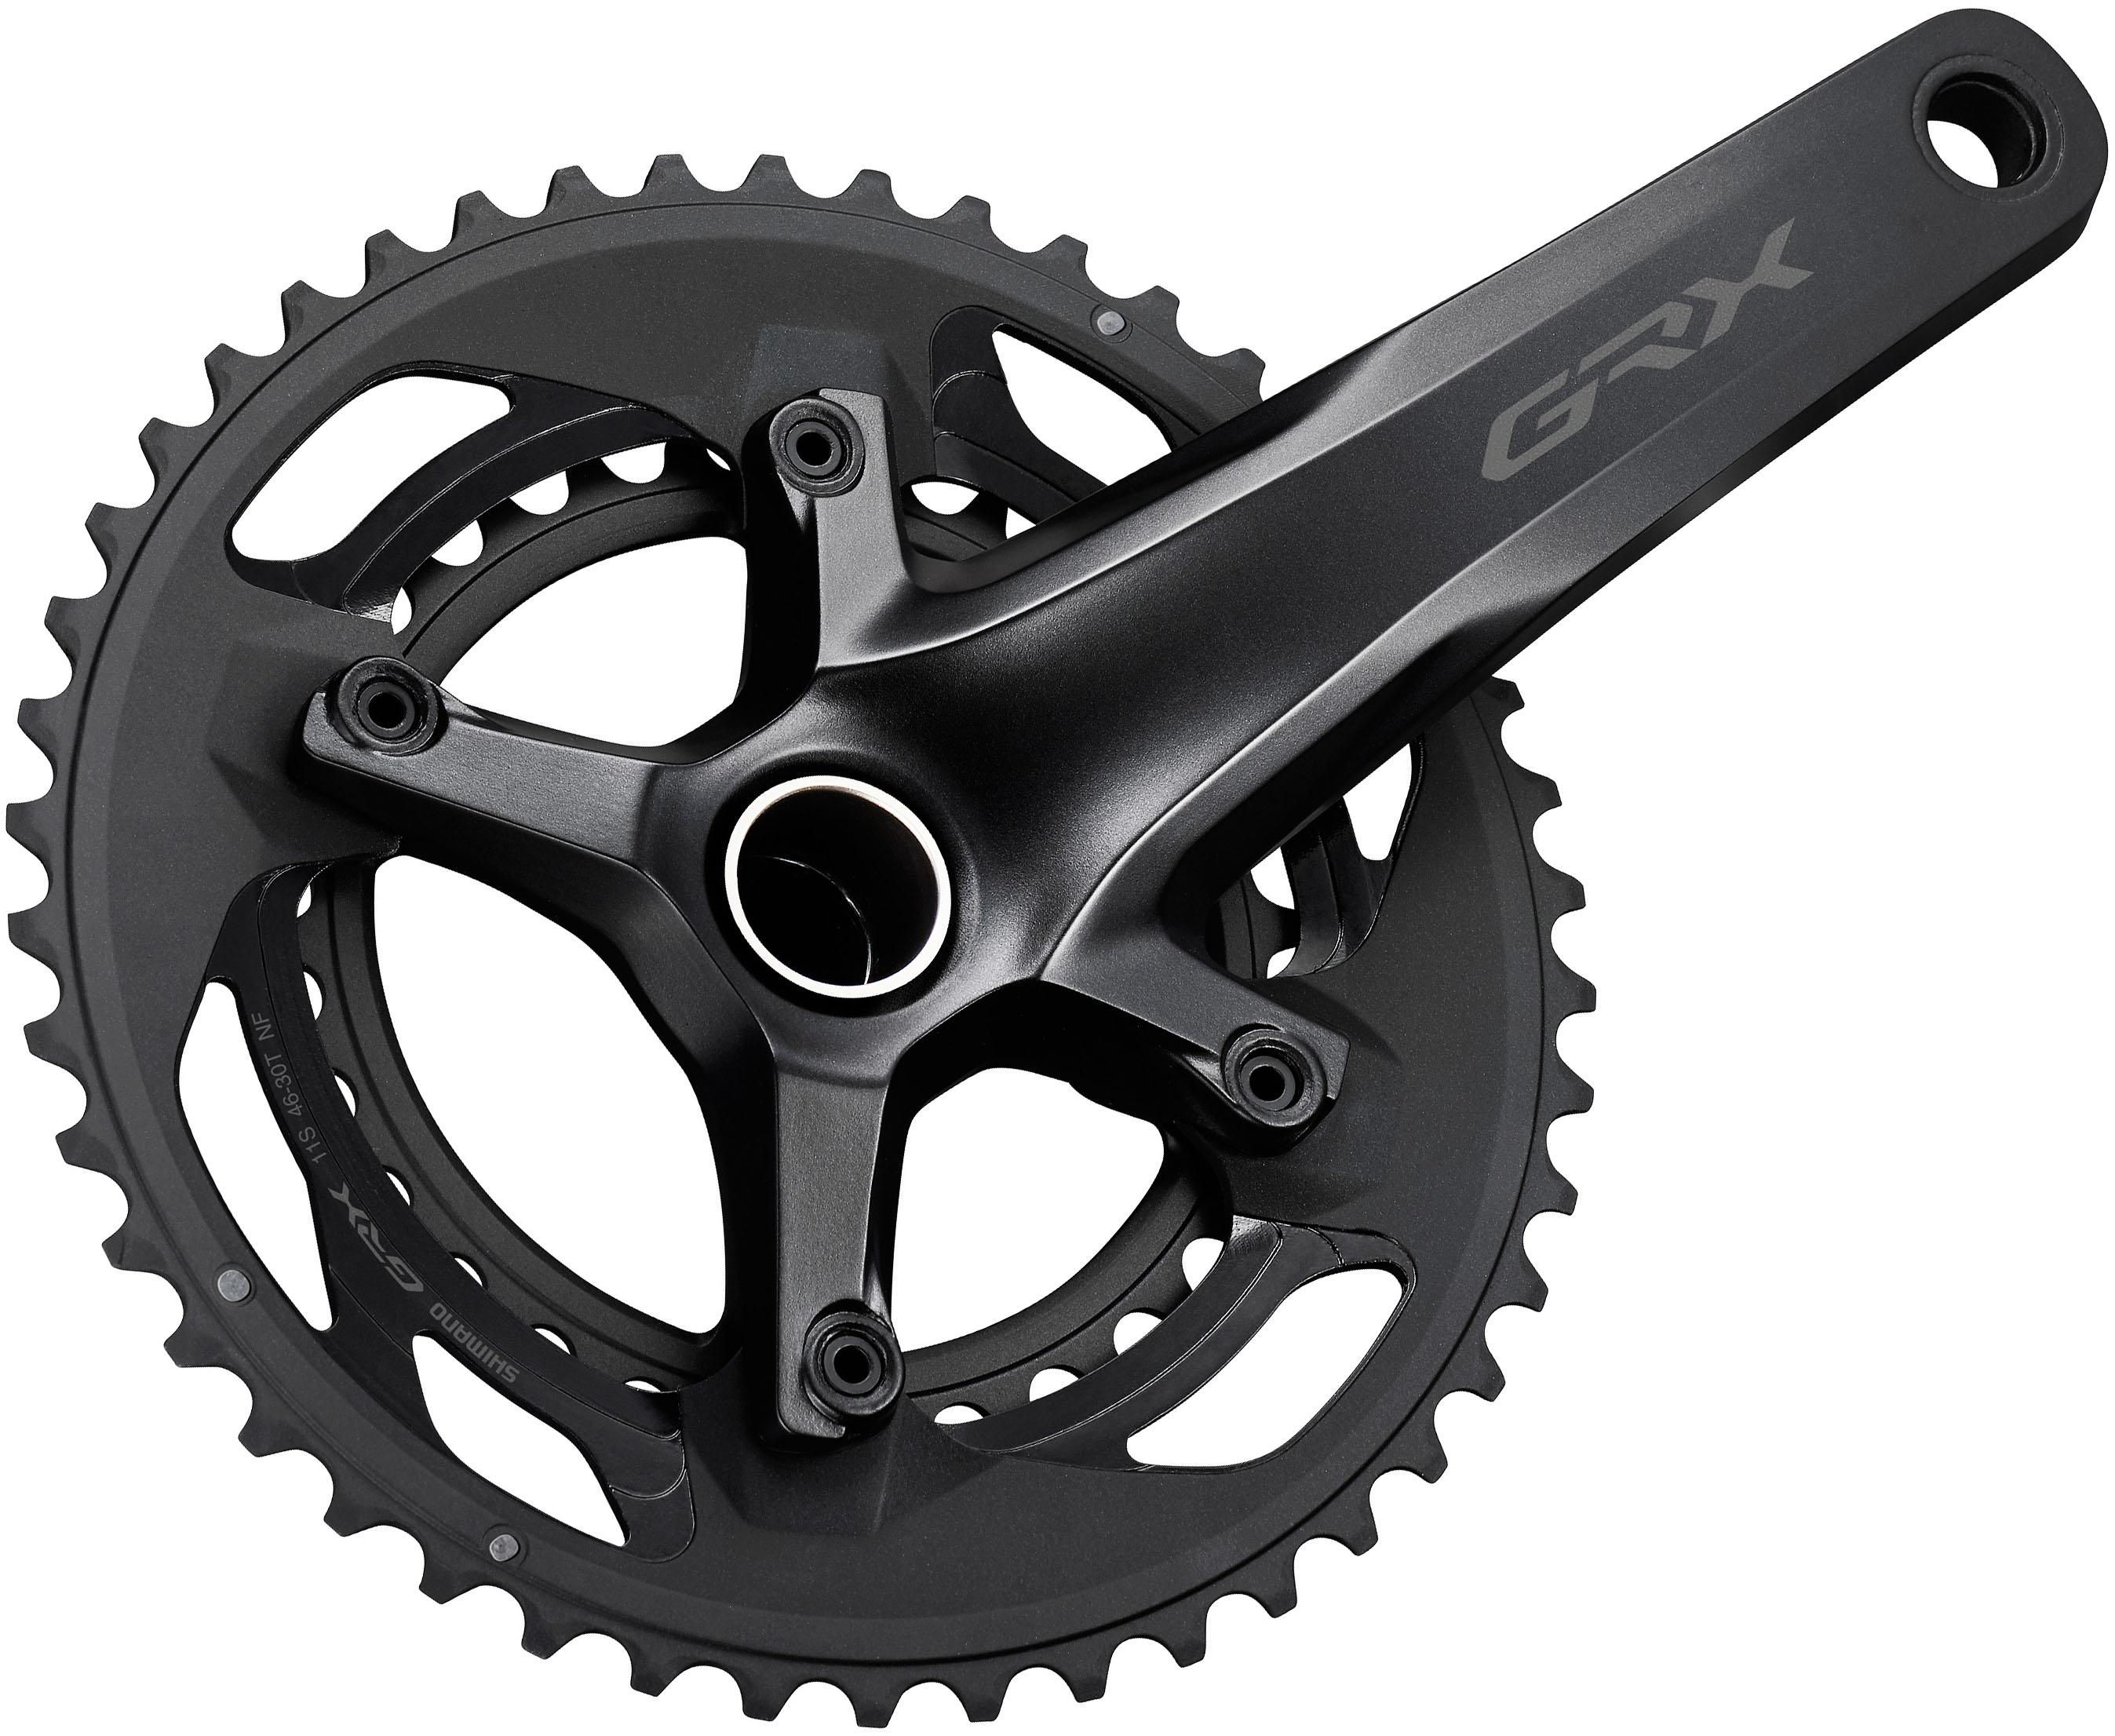 Shimano Grx 600 10 Speed Gravel Double Chainset  Black